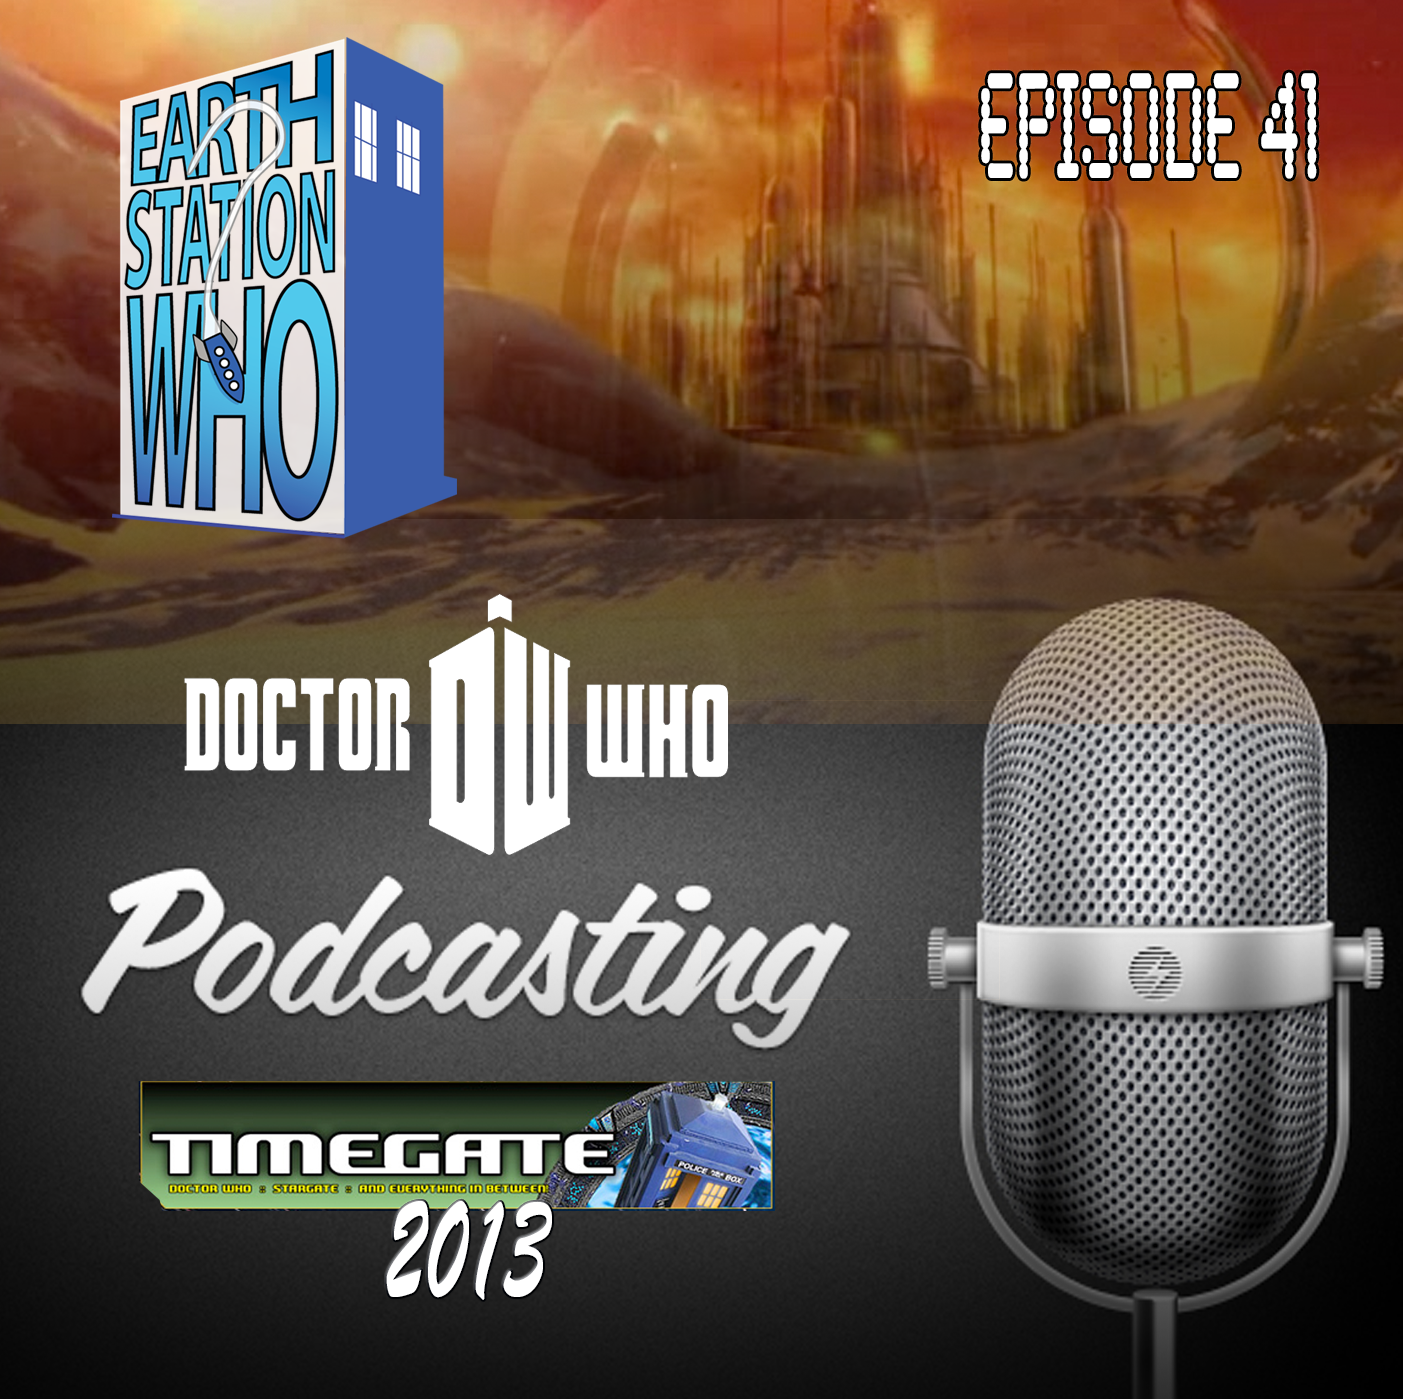 ESW Episode 41 - Time Gate Podcast Panel 2013